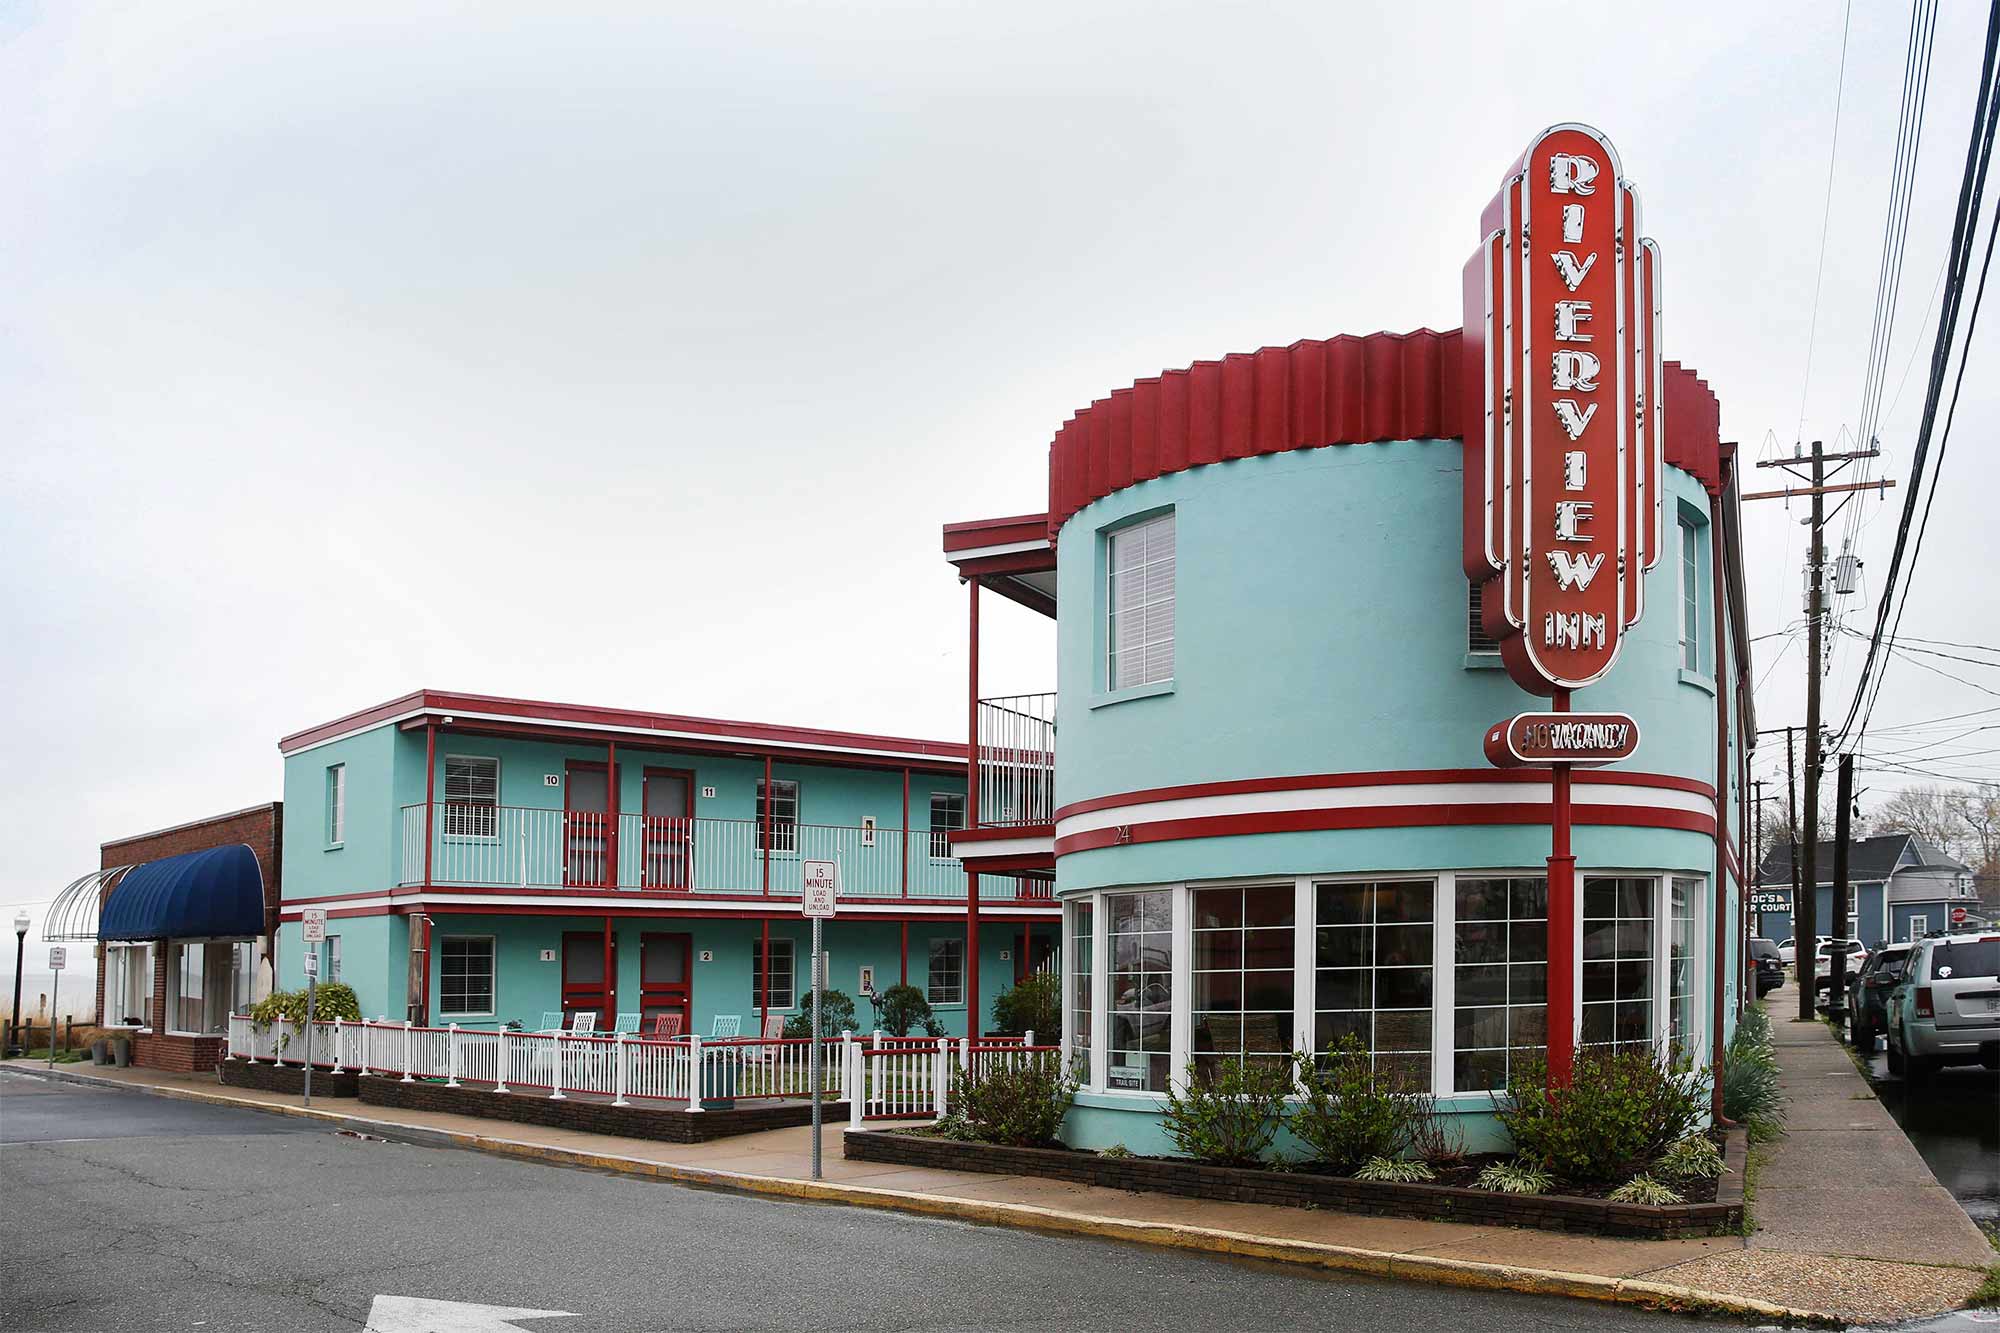 A 1950's style teal and red motel with a neon sign reading Riverview Inn